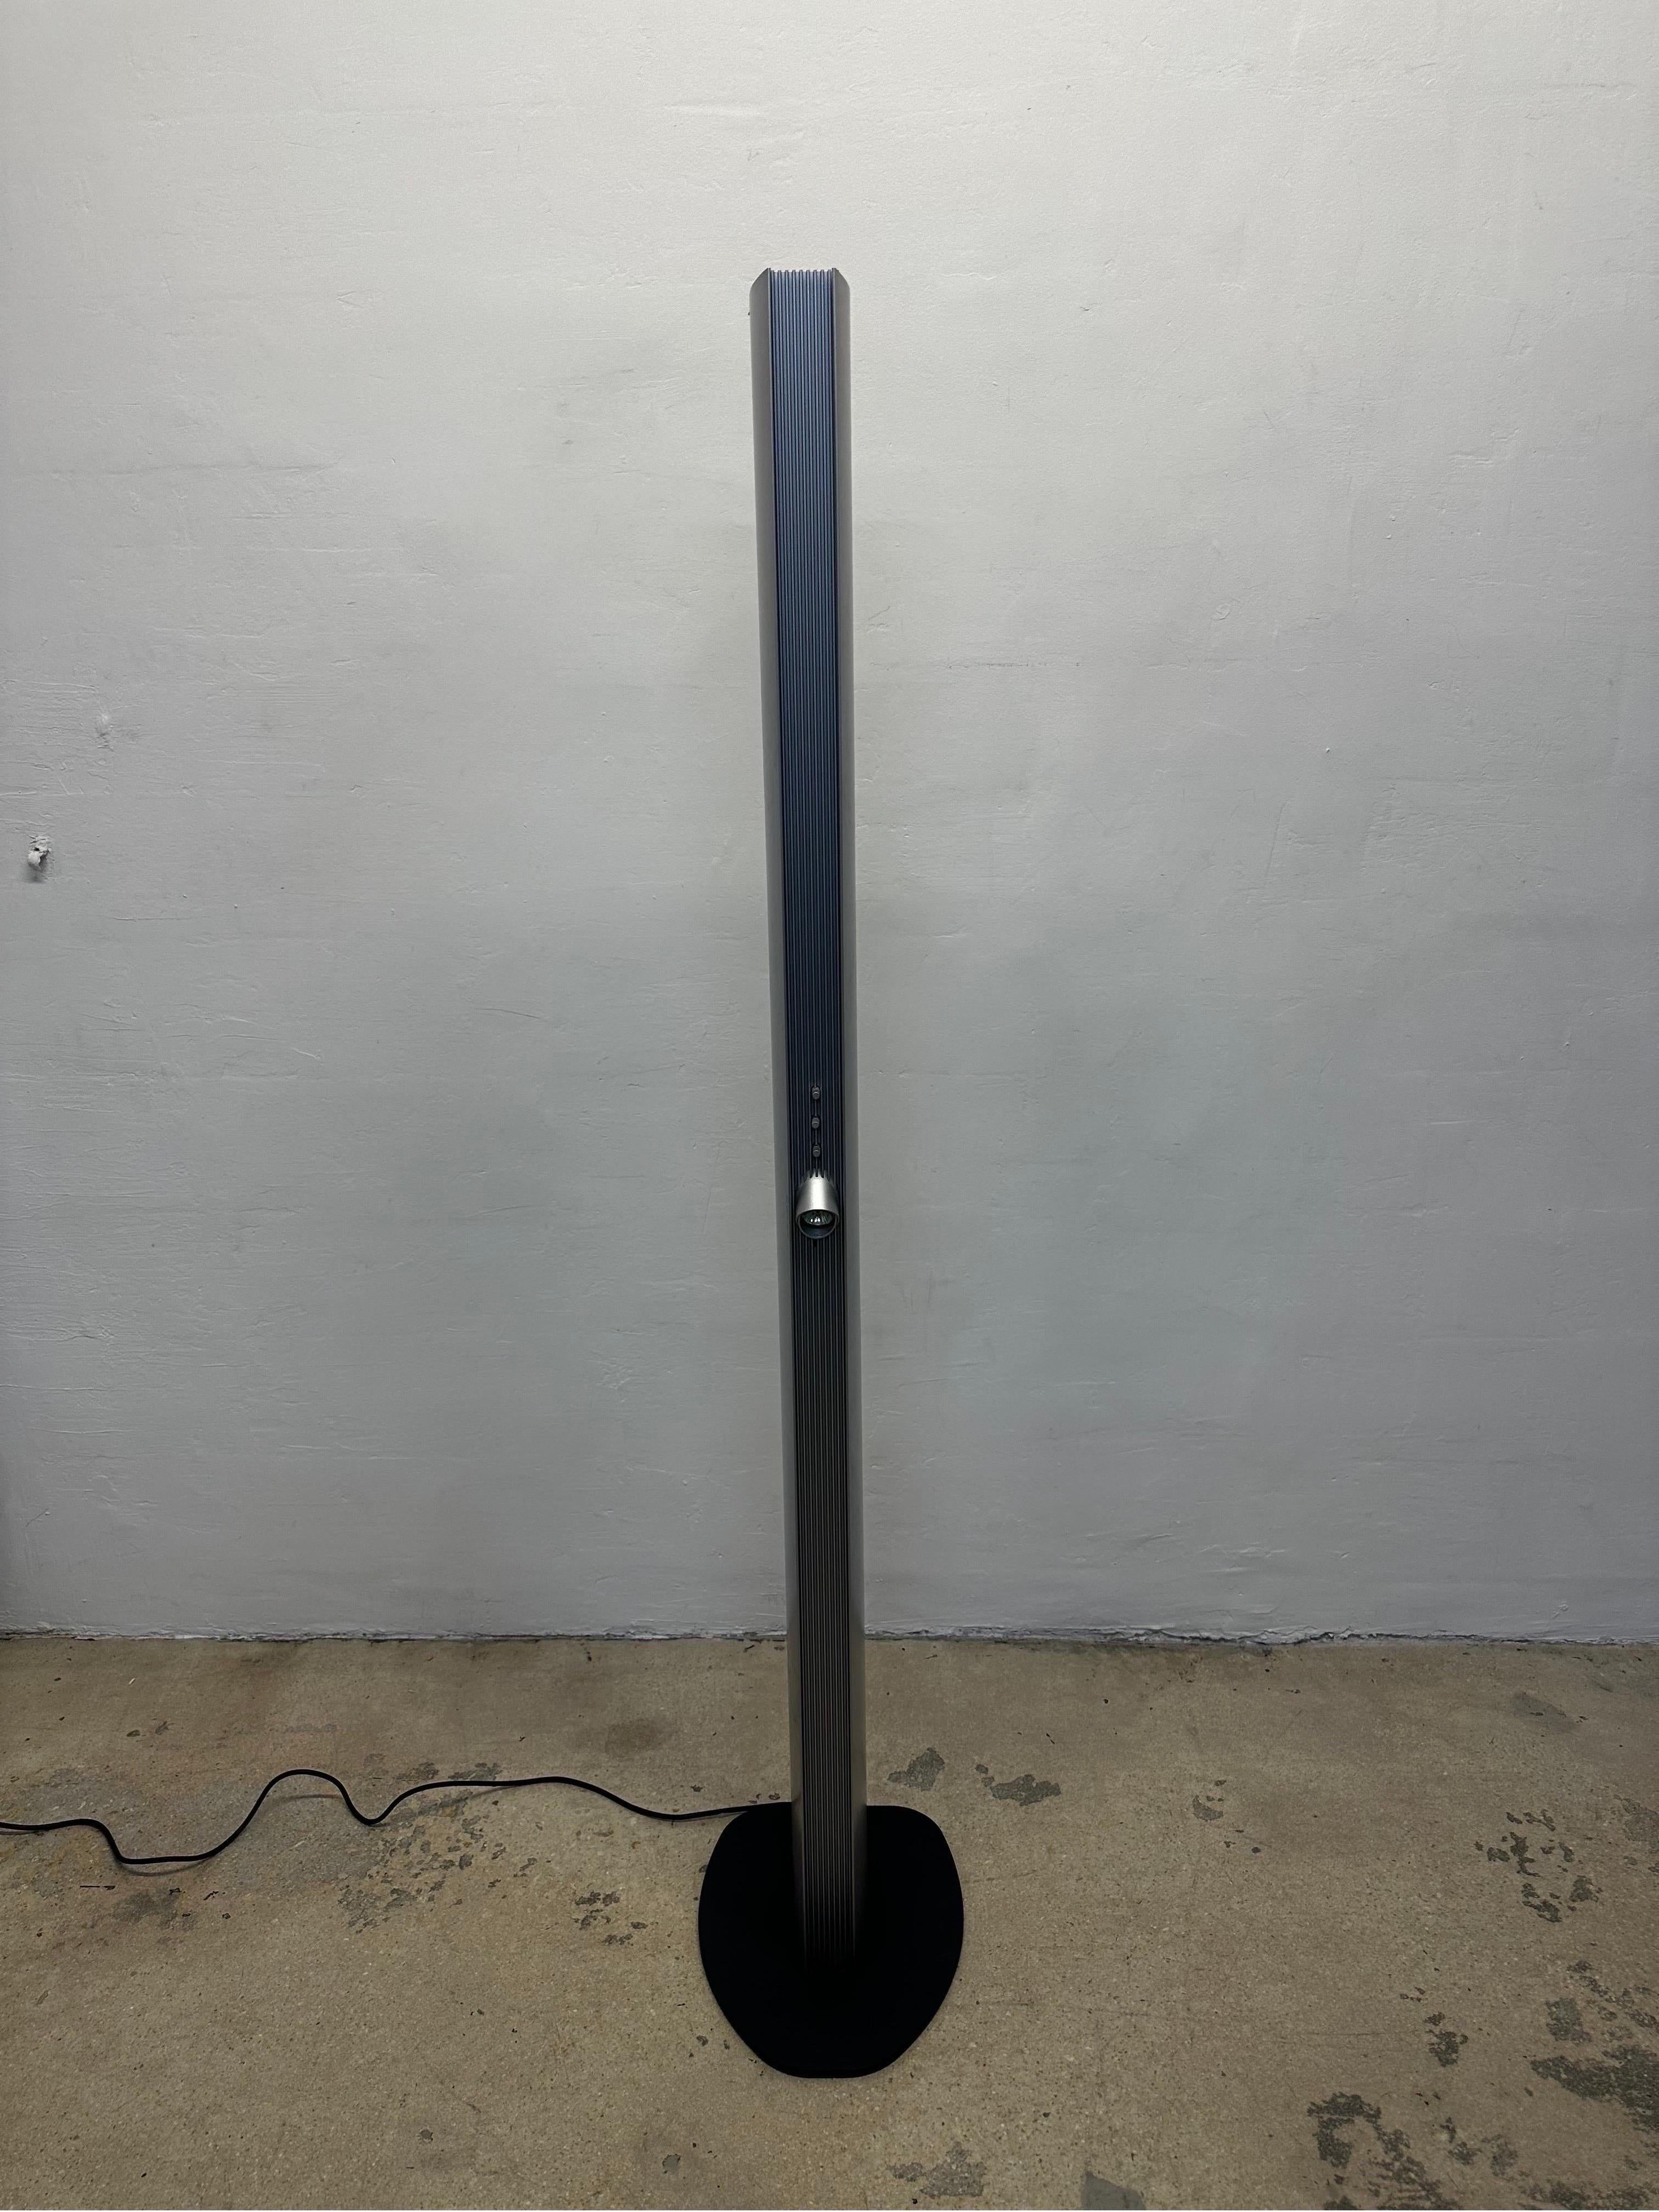 Echos floor lamp designed in the 1980s by Jean Van Lierde and produced by Artemide. The sculptural tower lamp features three separate light sources; halogen at the top, a dimmable swivel spotlight in the middle and a long fluorescent tube on the